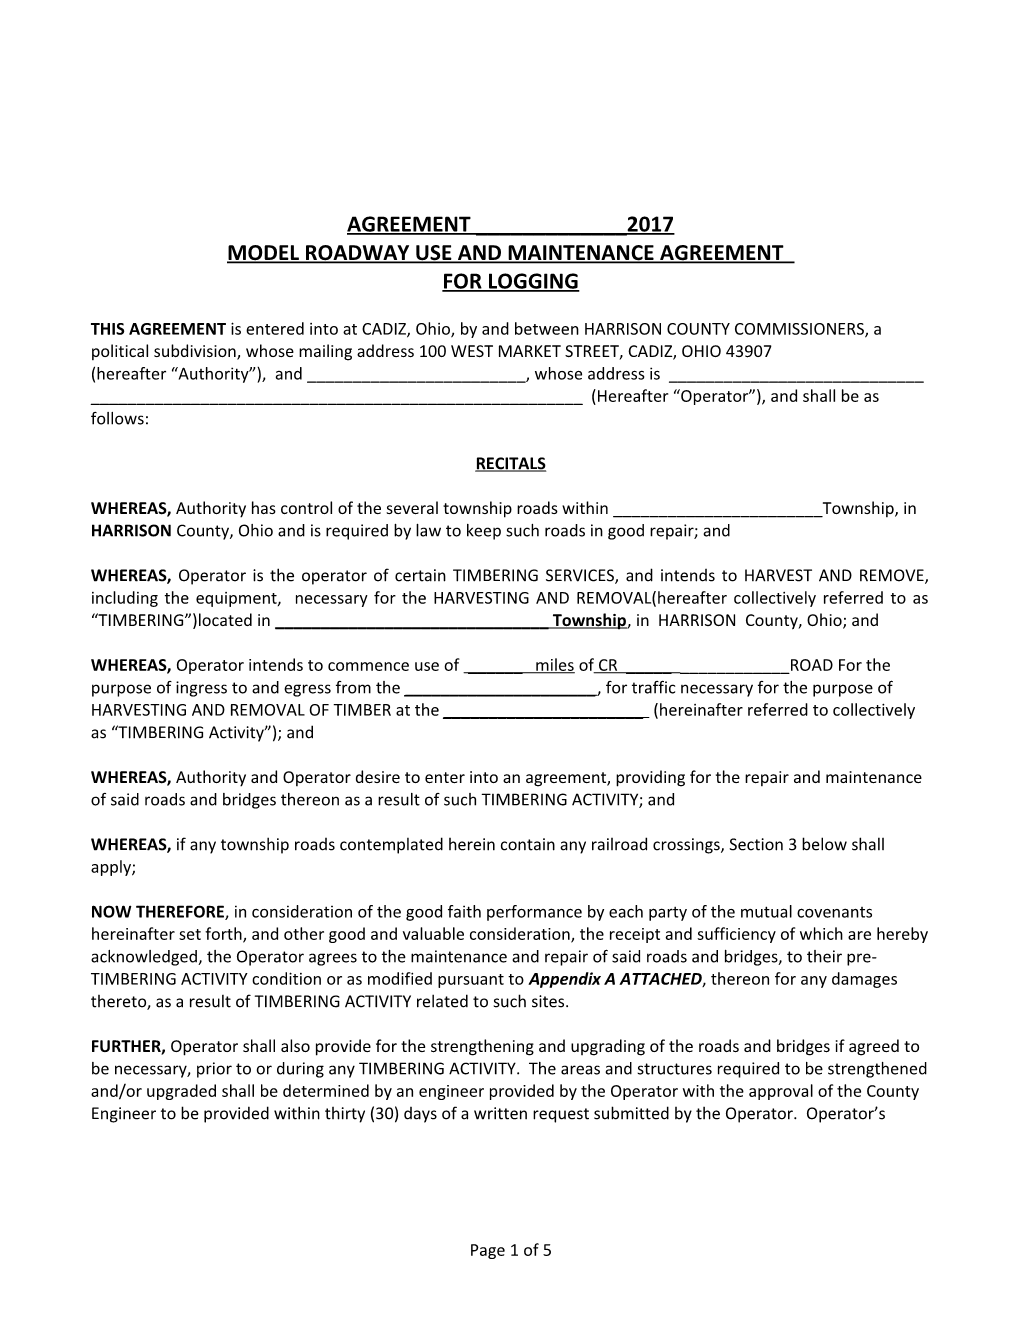 Model Roadway Use and Maintenance Agreement